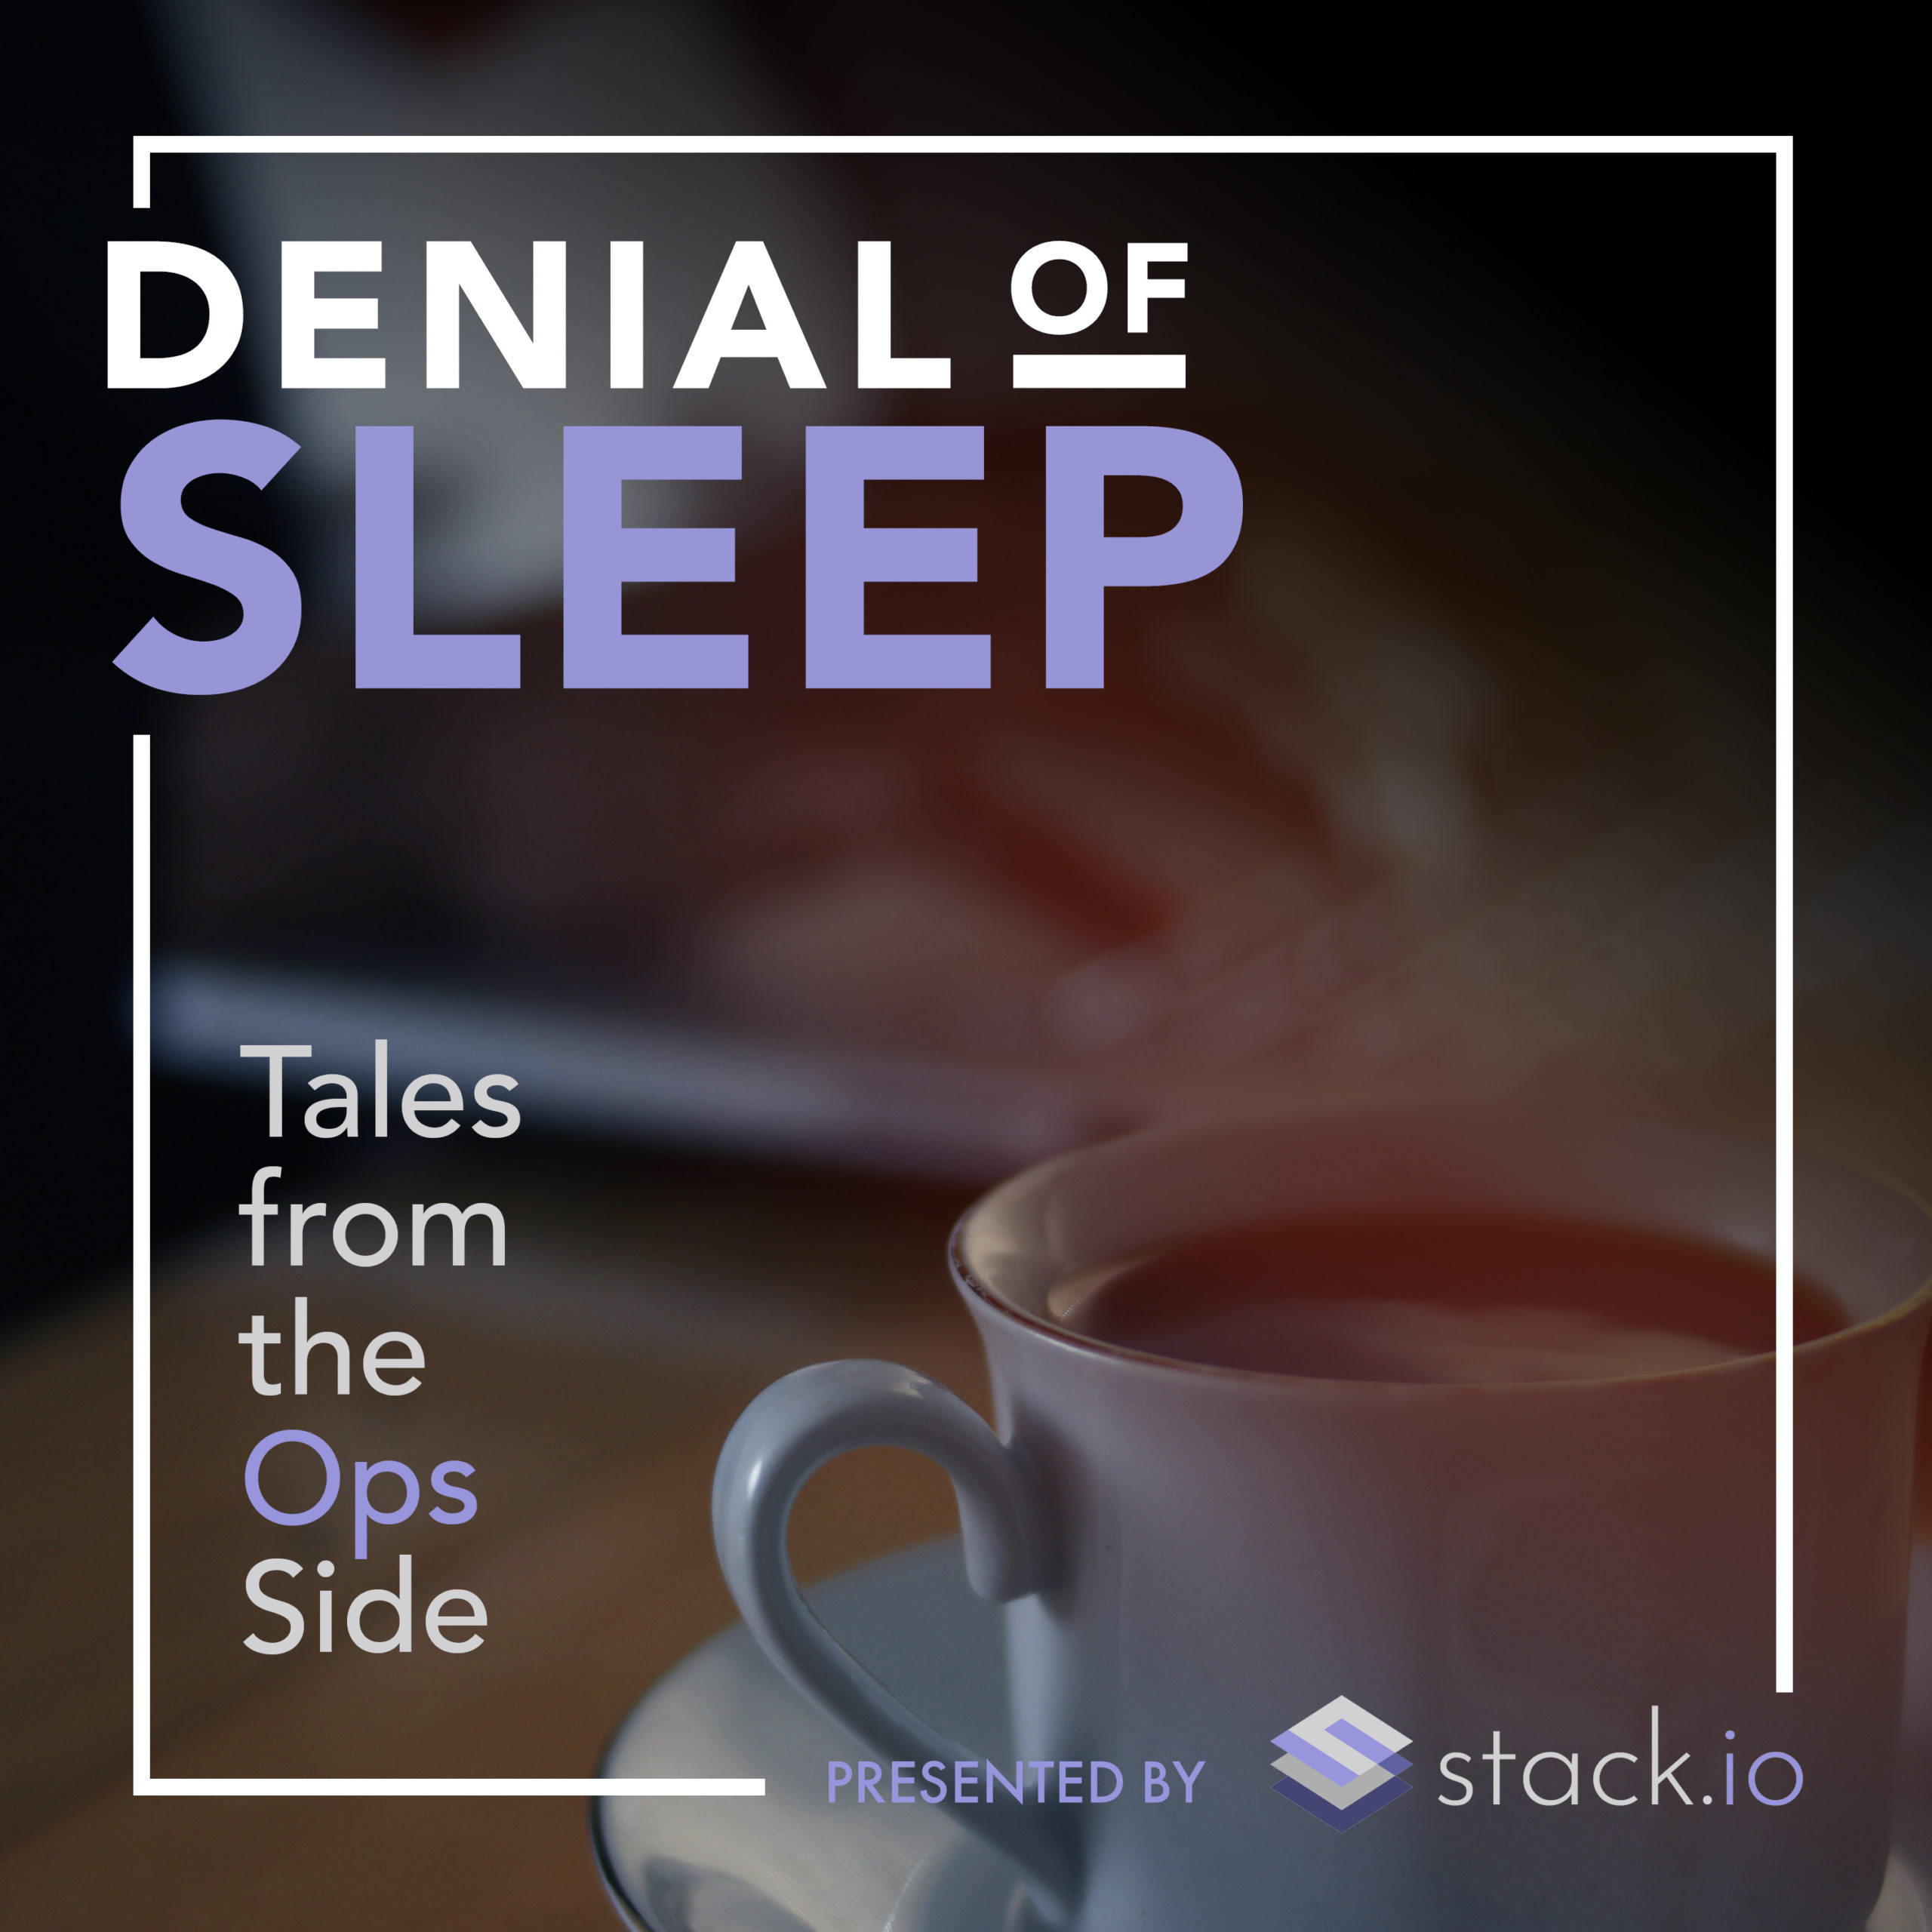 Tales from the Ops Side - Episode 1 - Denial of Sleep